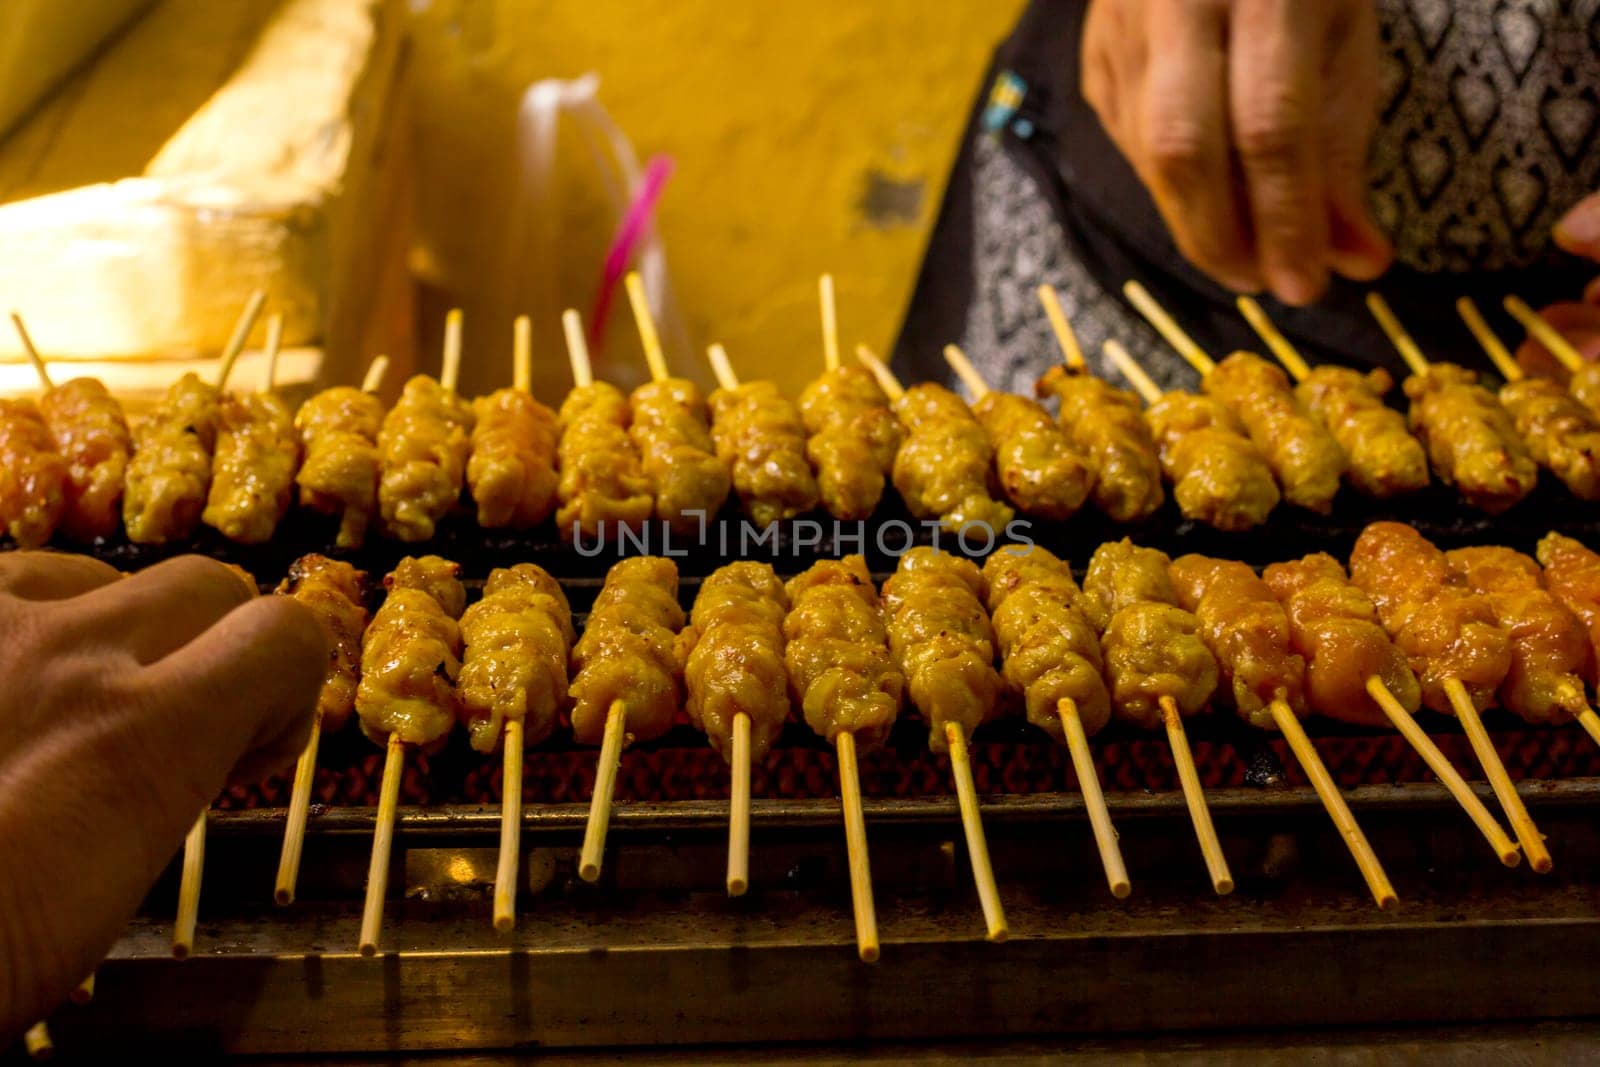 This grilled pork satay is marinated in a creamy peanut butter and soy sauce mixture